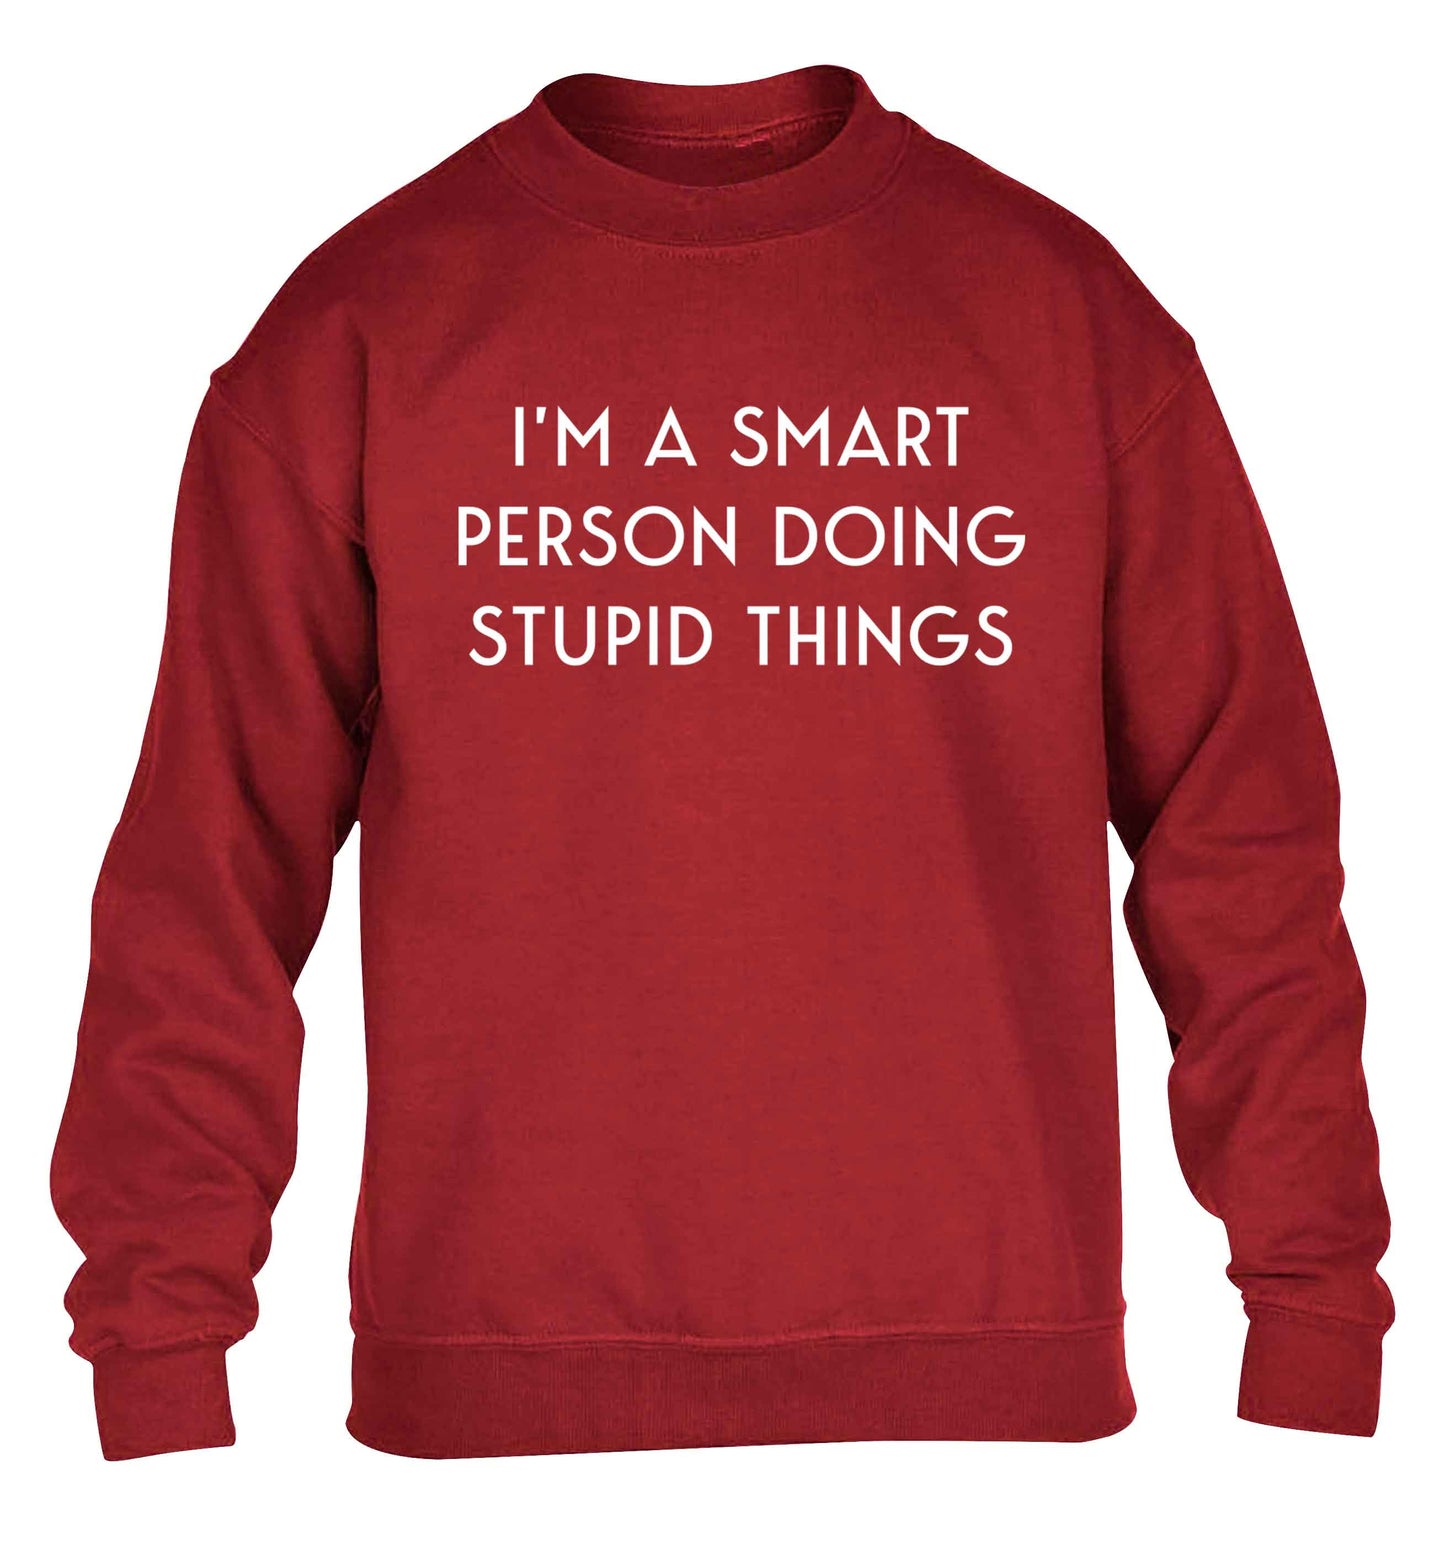 I'm a smart person doing stupid things children's grey sweater 12-13 Years